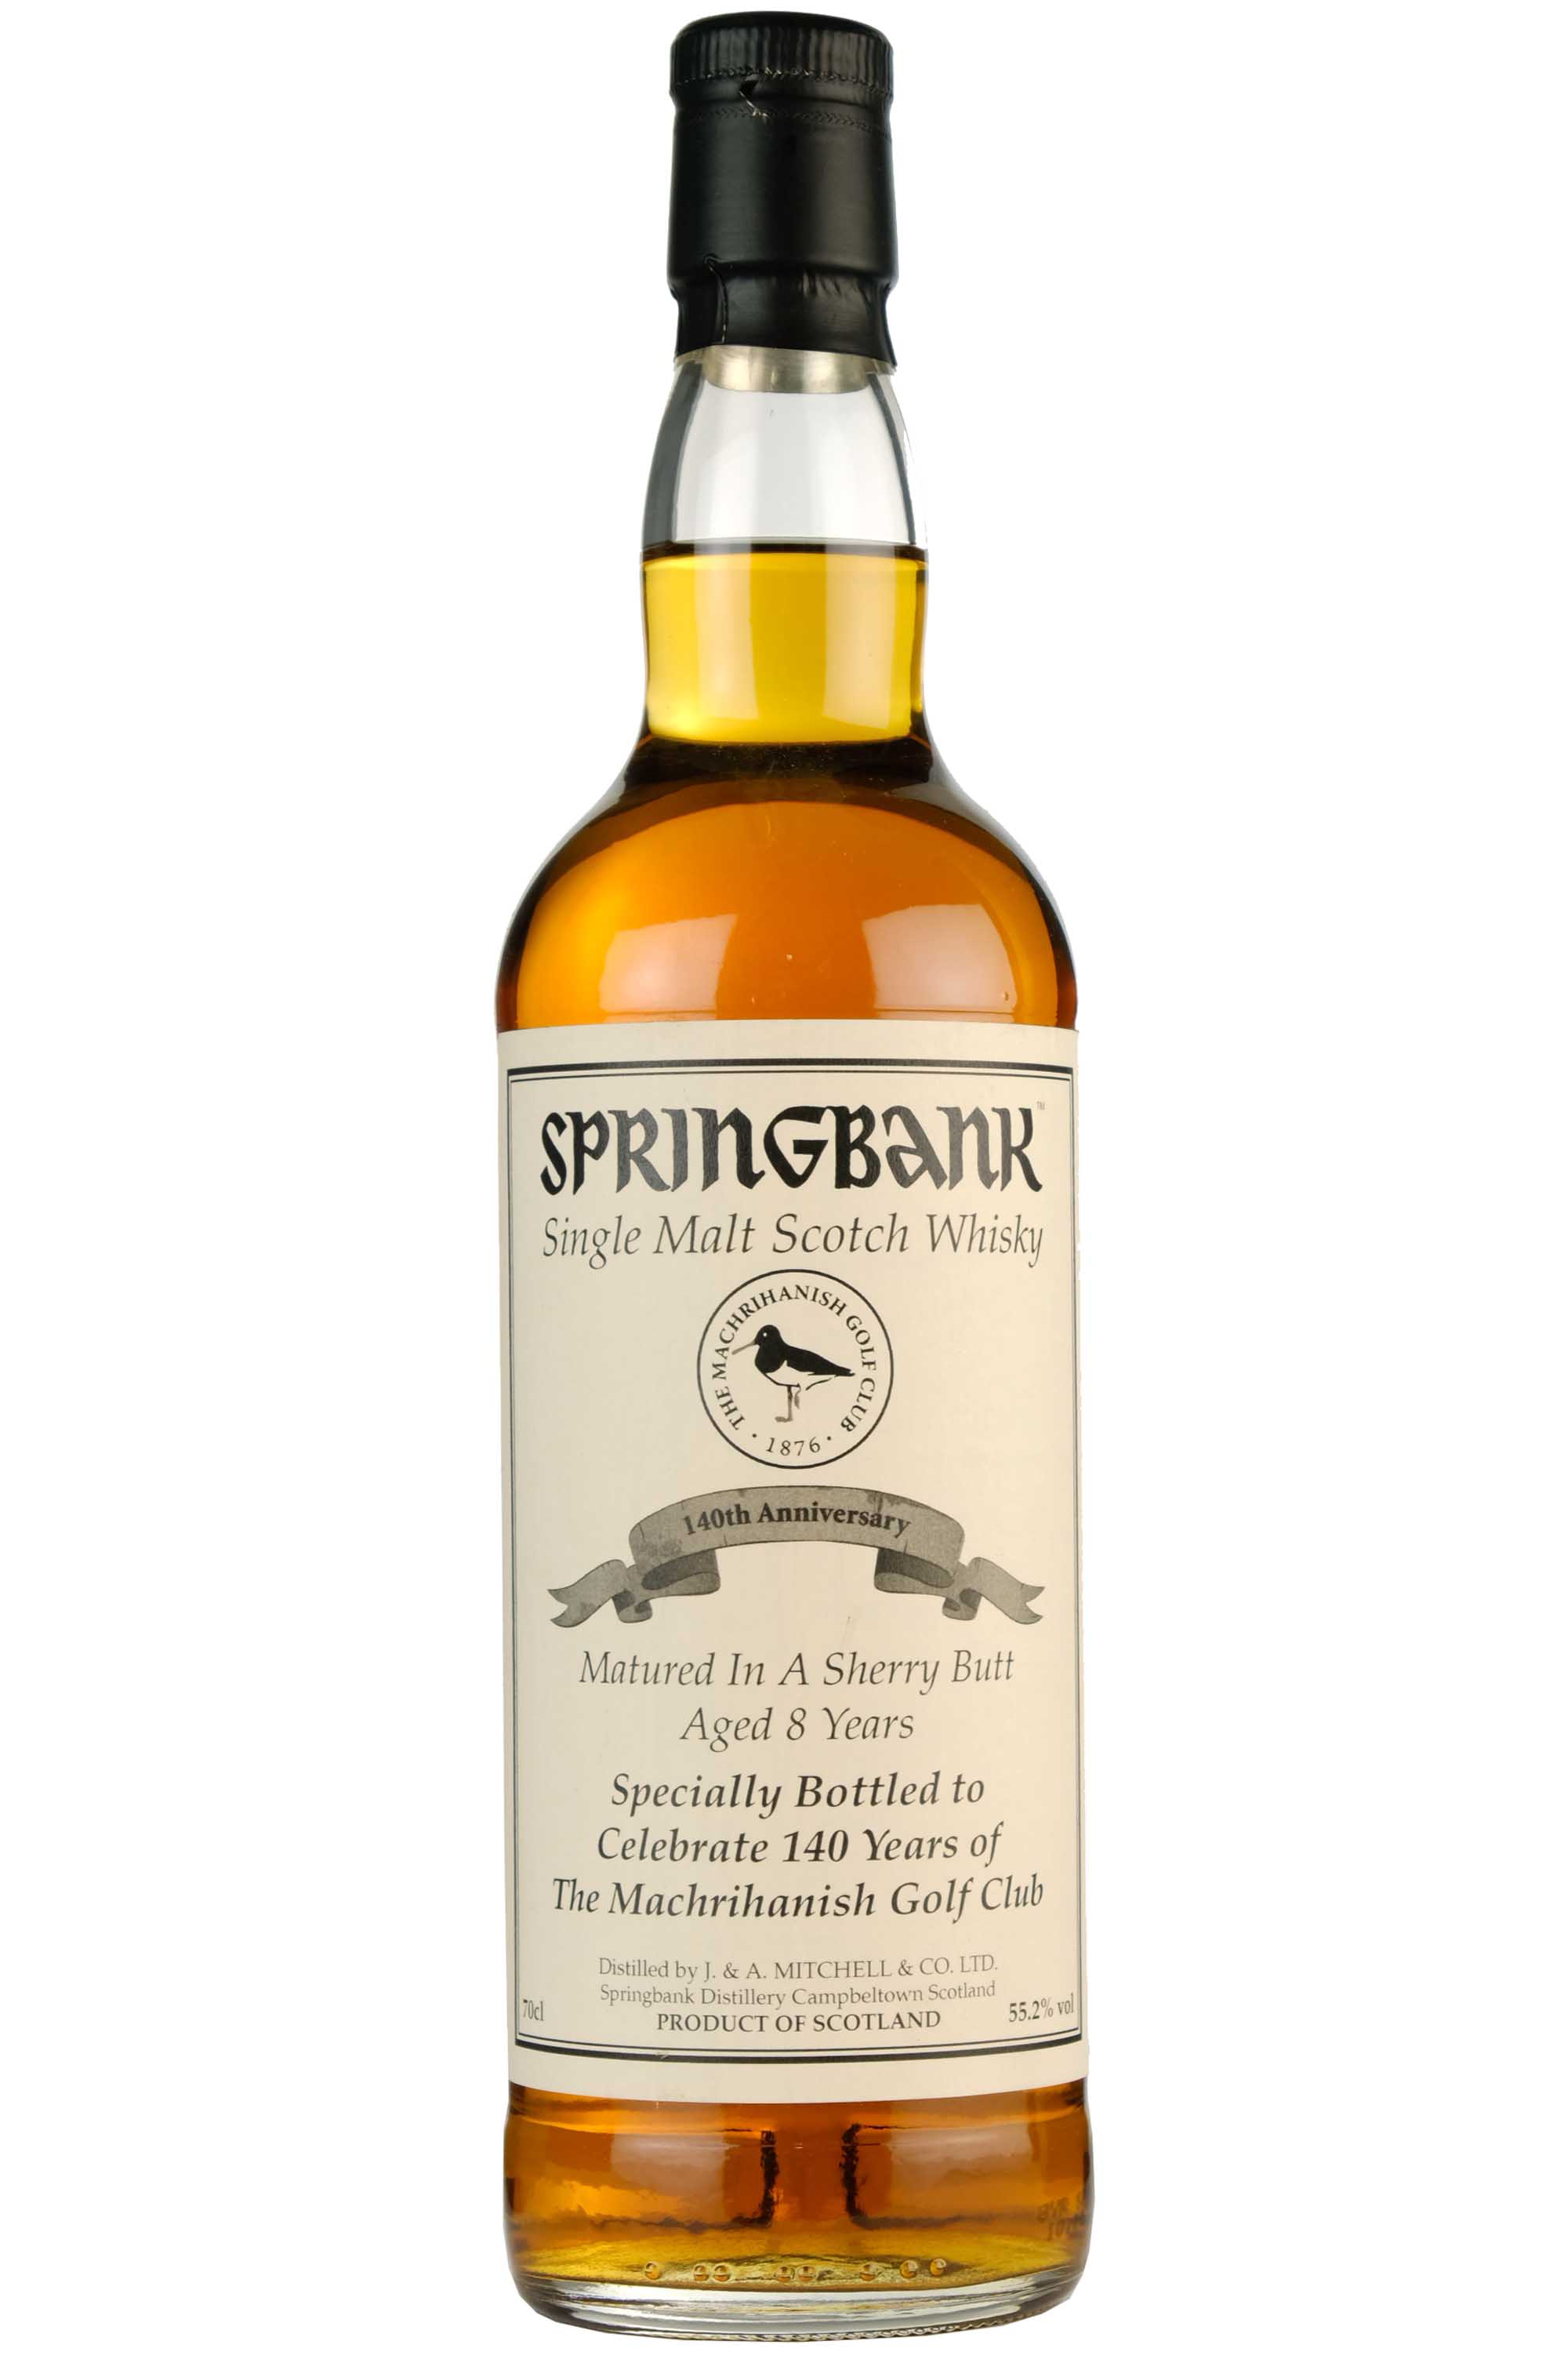 Springbank 8 Year Old | Private Bottling For Machrihanish Golf Club 2016